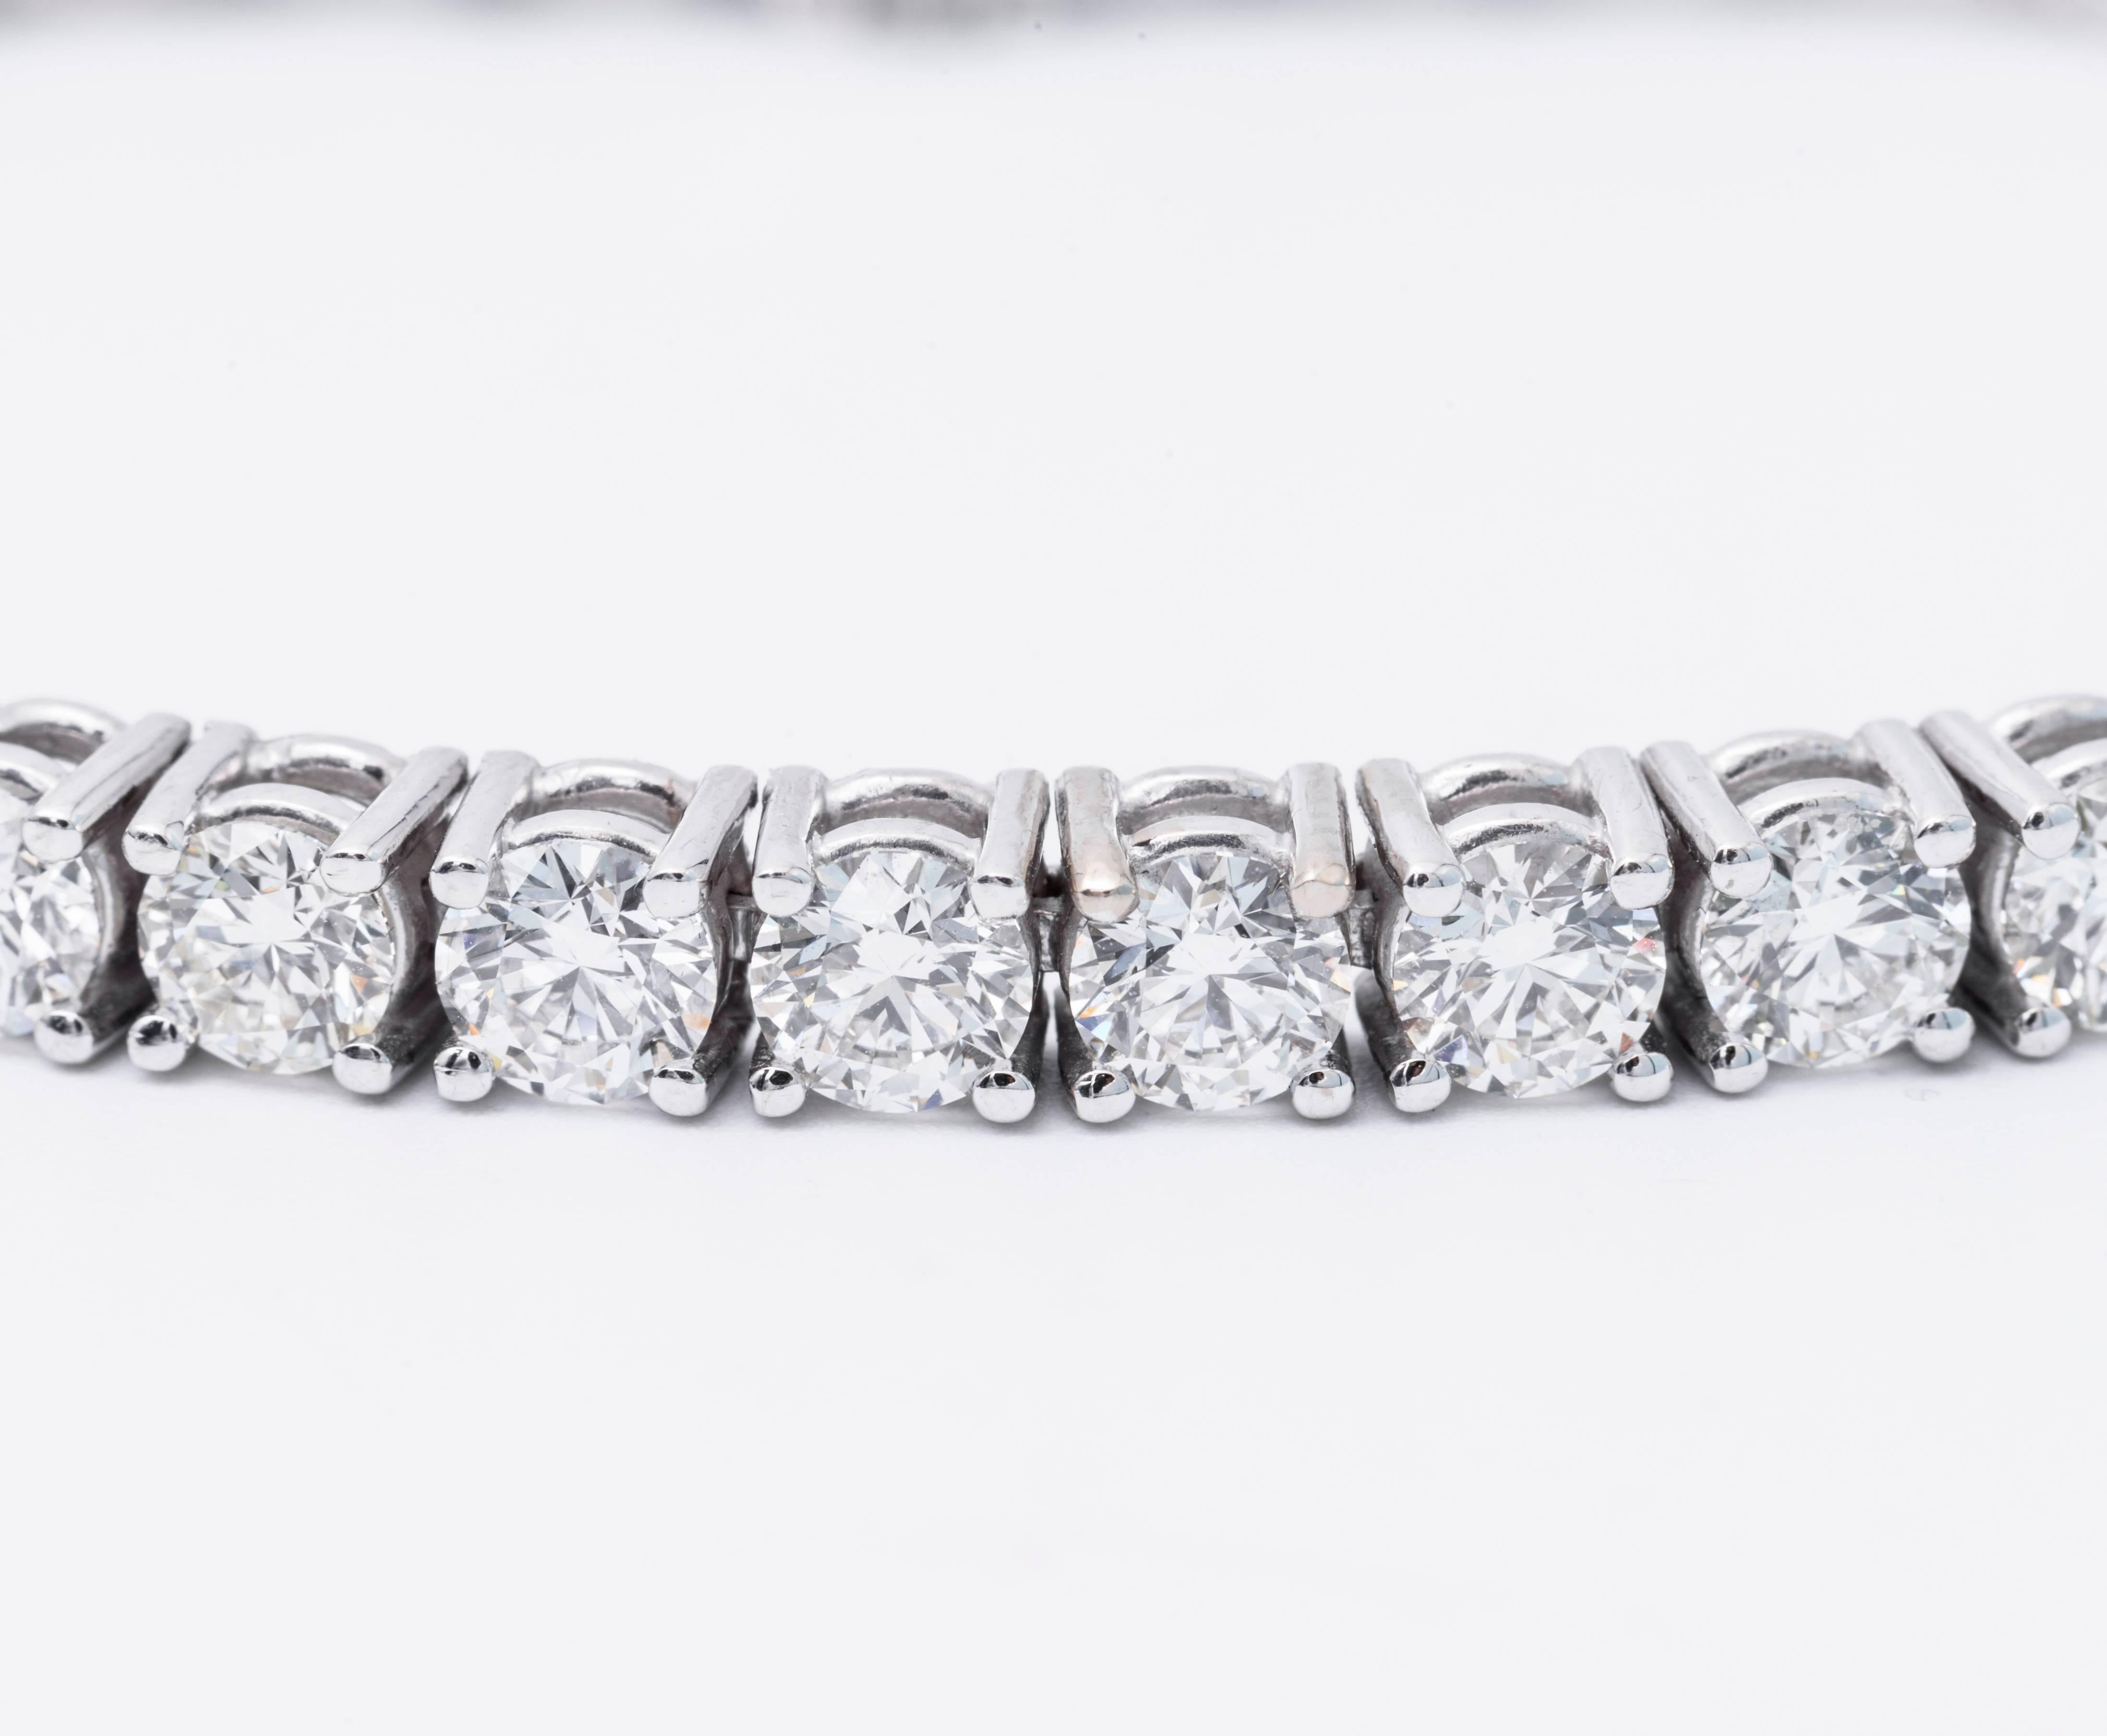 Classic tennis bracelet 5 CT’s total weight
All diamonds are perfectly matched by our very experienced gemologist.
All diamonds are 
G-H Color
SI1 Quality
Very bright and full of life
100% eye clean to the naked eye.
7 inches long(Standard), could